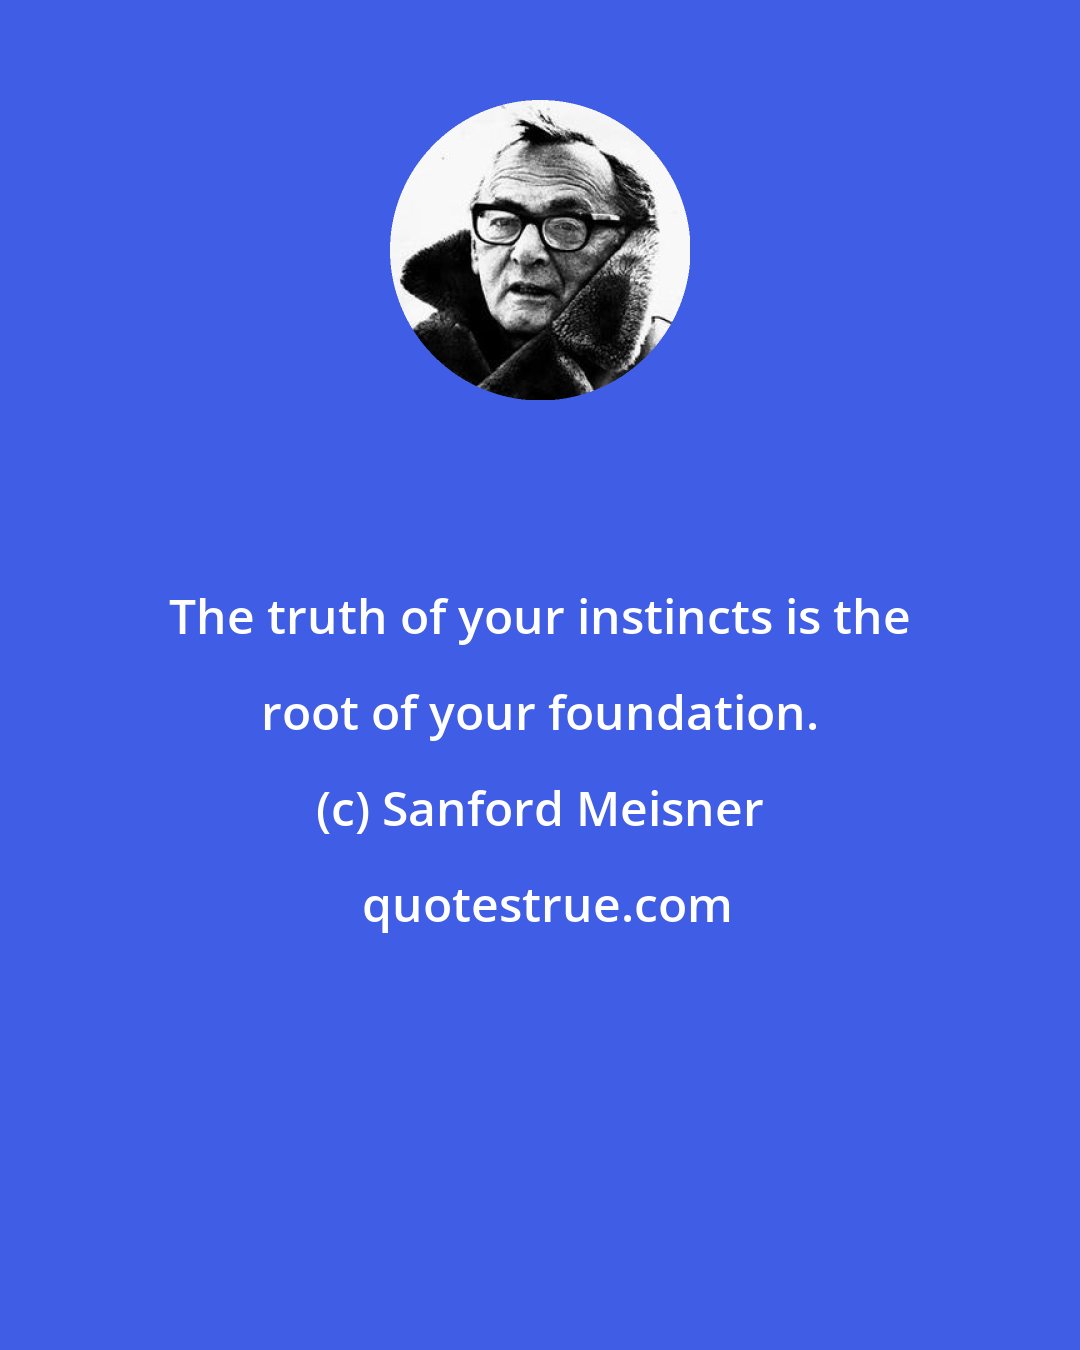 Sanford Meisner: The truth of your instincts is the root of your foundation.